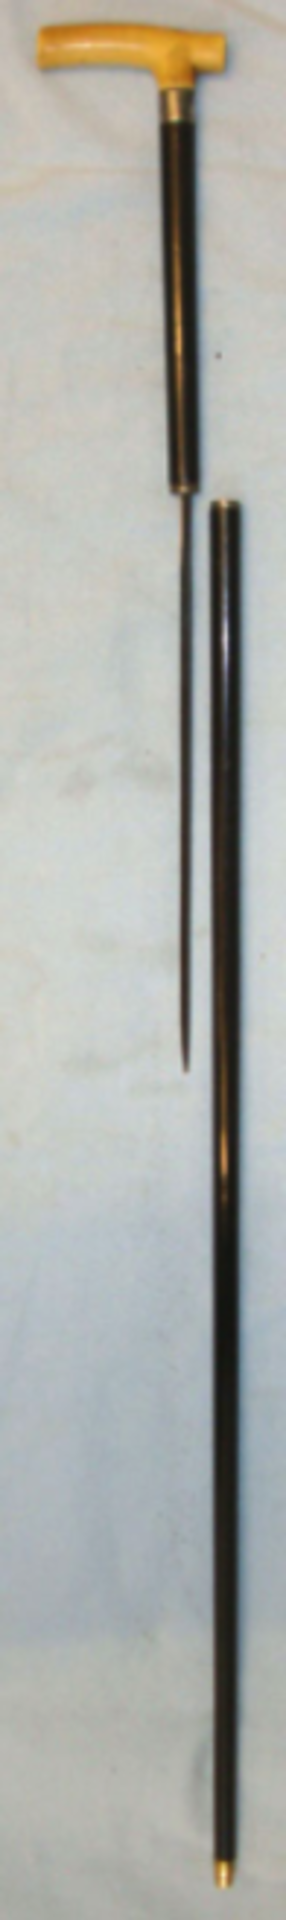 WW1 British Officer’s Lacquered Wood Sword Stick With Ferrule Engraved To ‘Captain Chas Alford' - Image 3 of 3